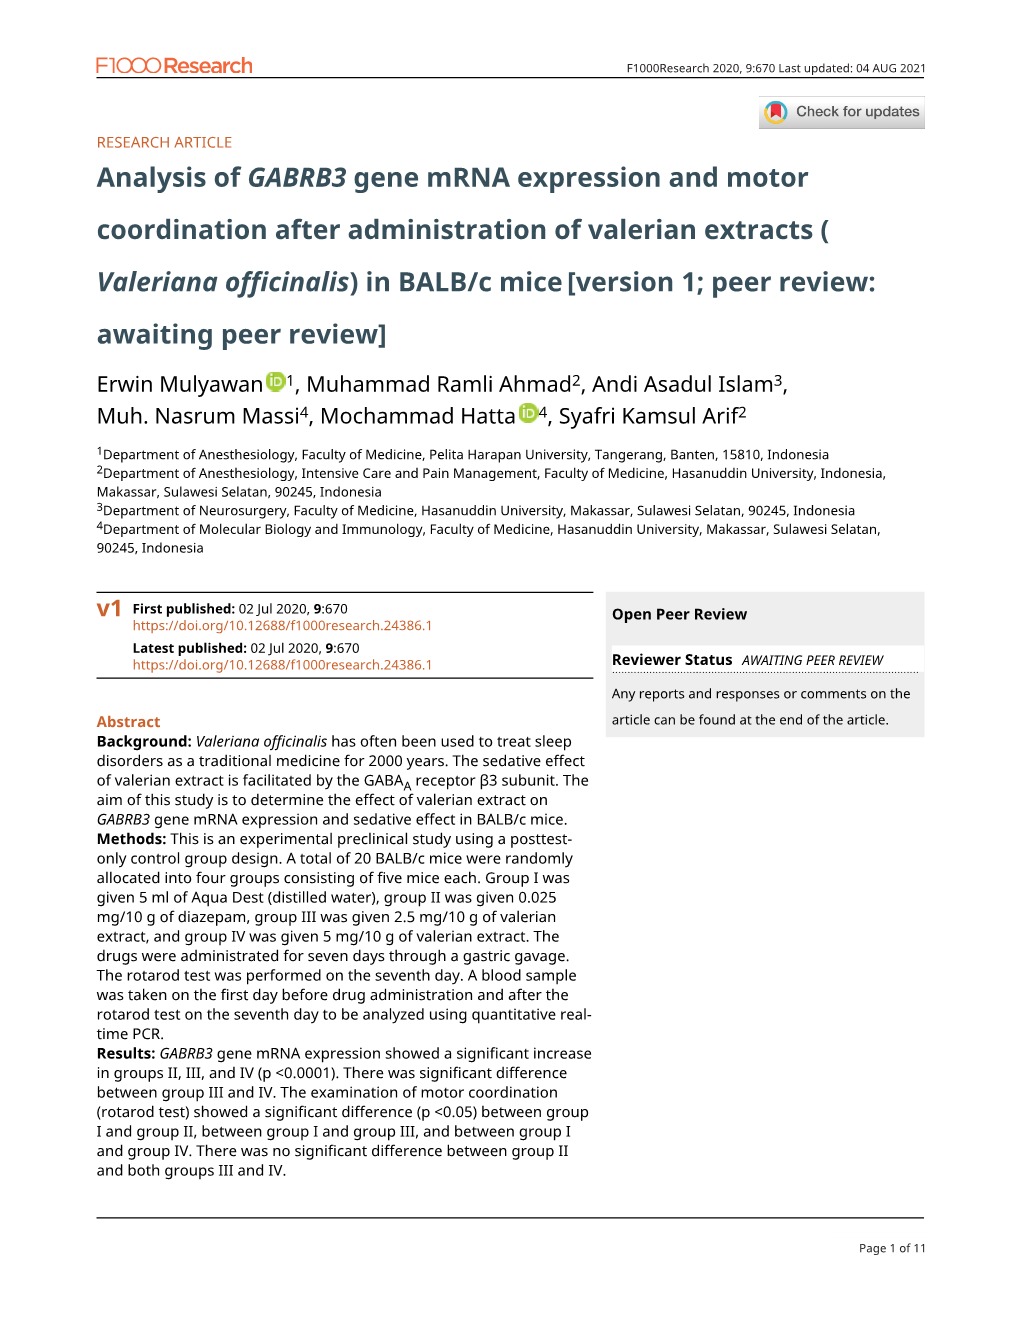 Analysis of GABRB3 Gene Mrna Expression and Motor Coordination After Administration of Valerian Extracts ( Valeriana Officinalis